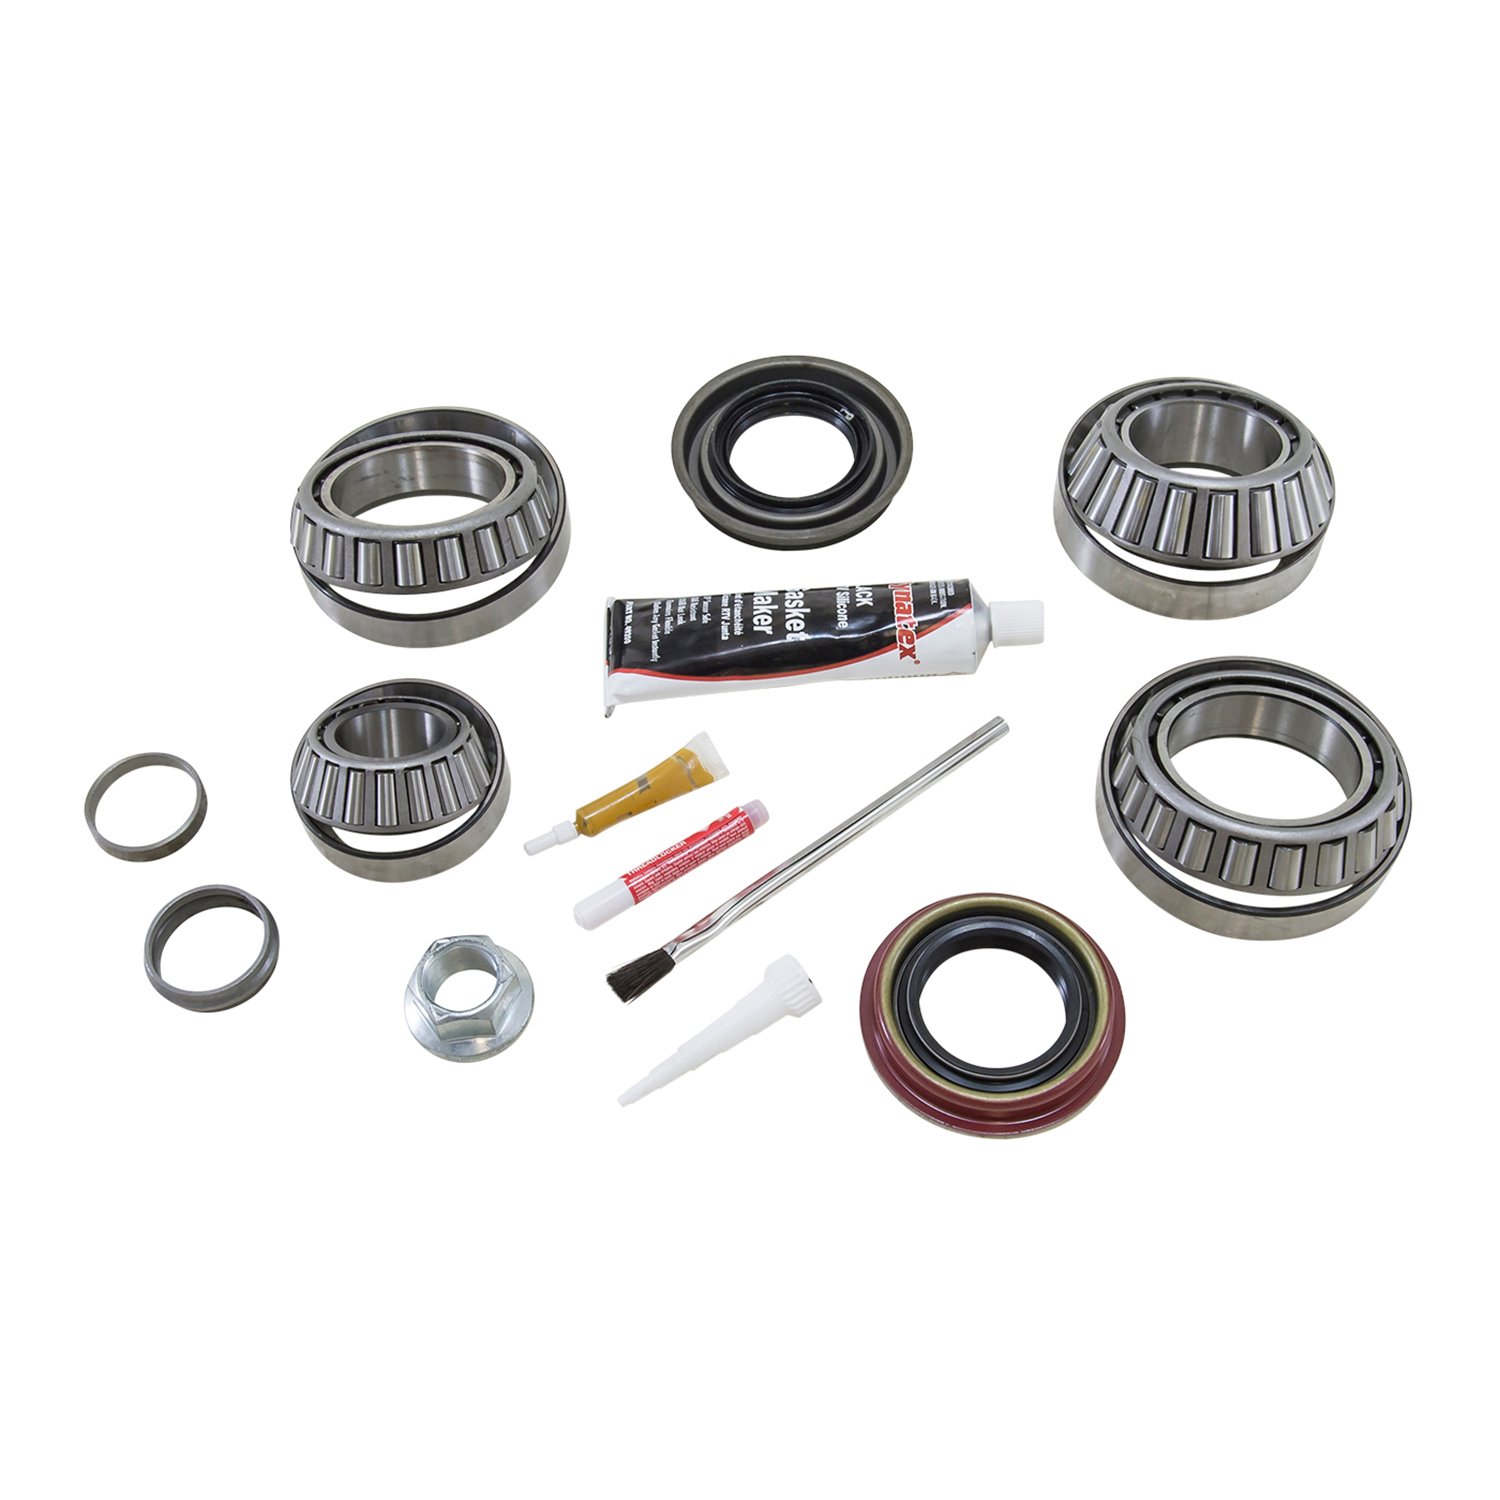 Bearing Install Kit For '00-'07 Ford 9.75 in. Differential.